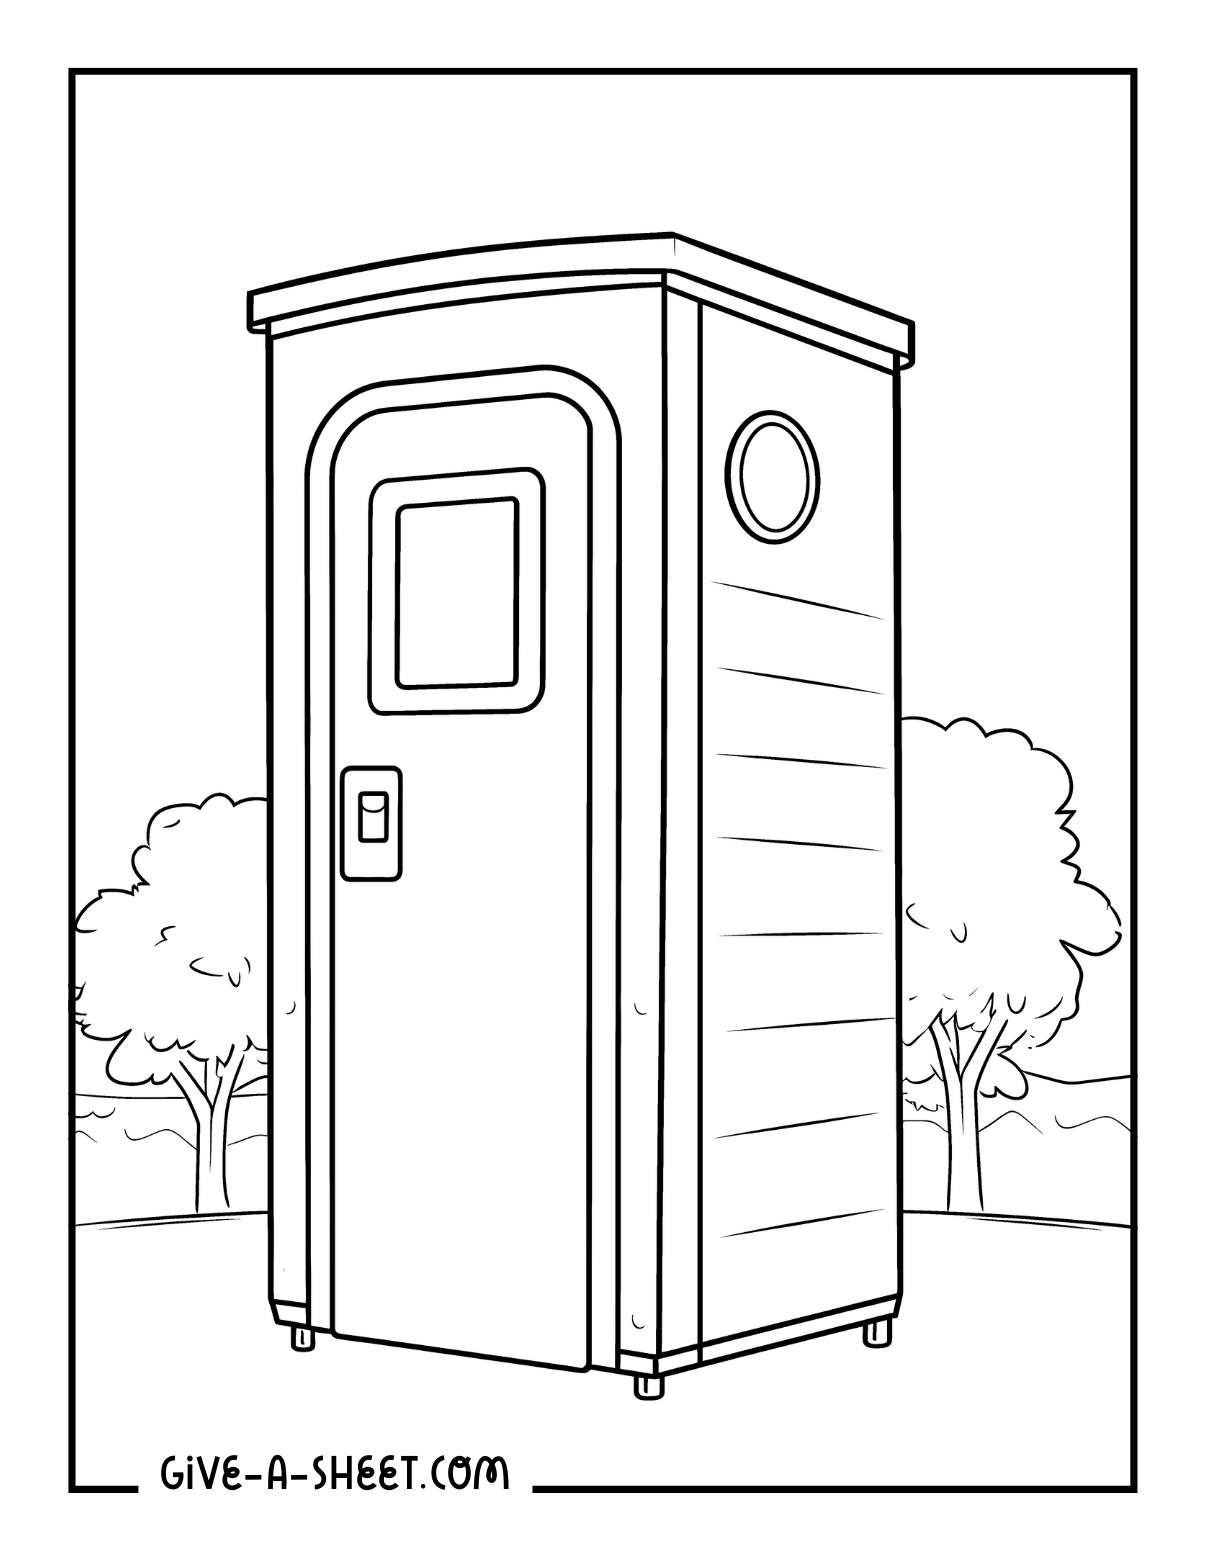 Outdoor toilet porta potty free coloring pages.